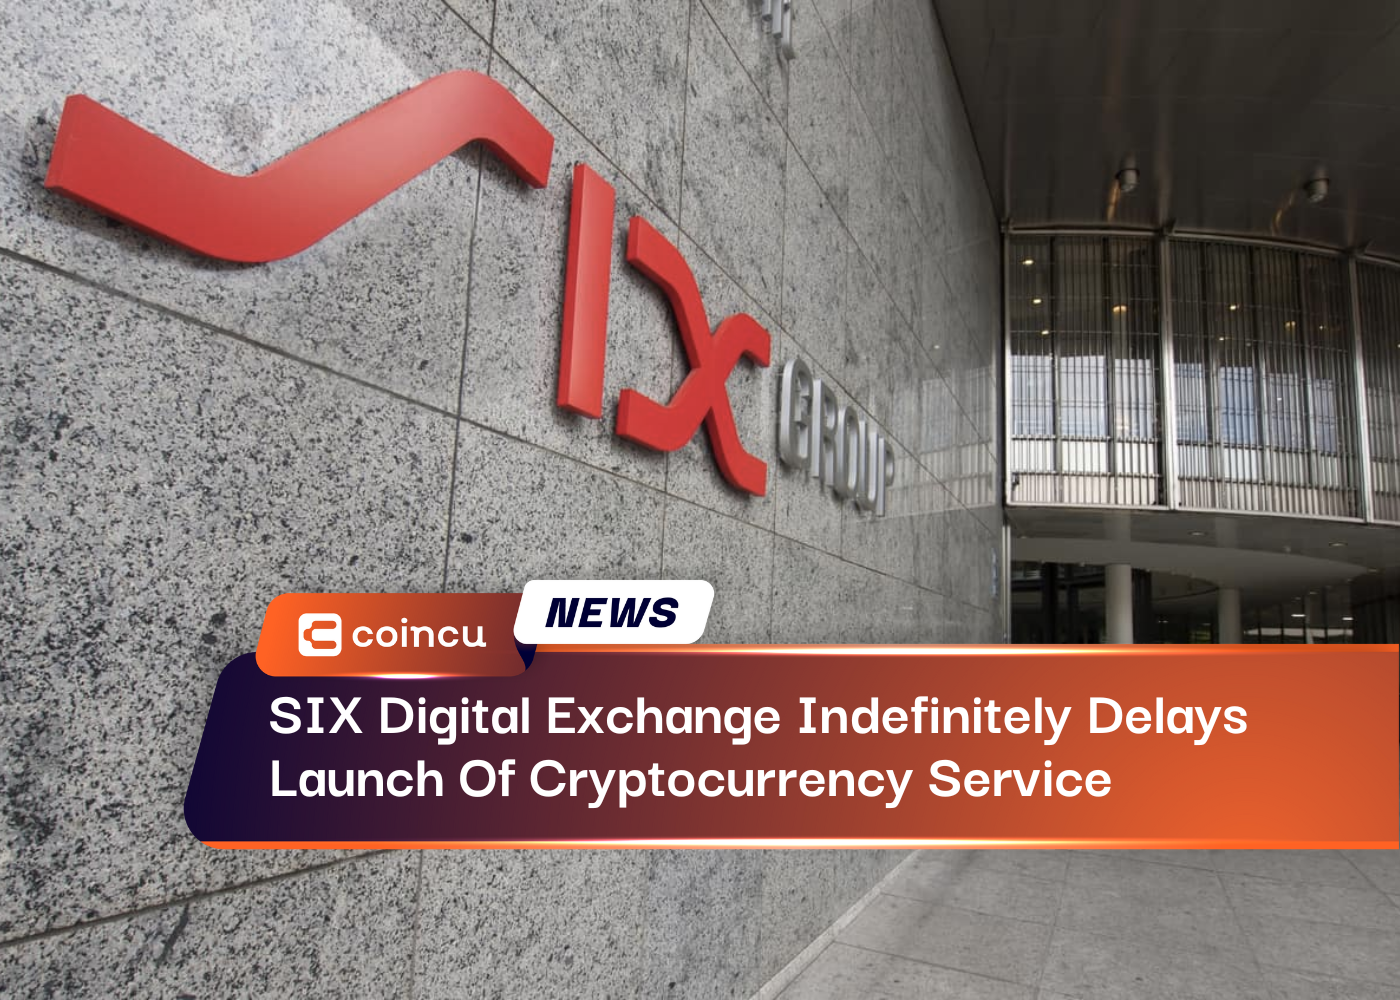 SIX Digital Exchange Indefinitely Delays Launch Of Cryptocurrency Service